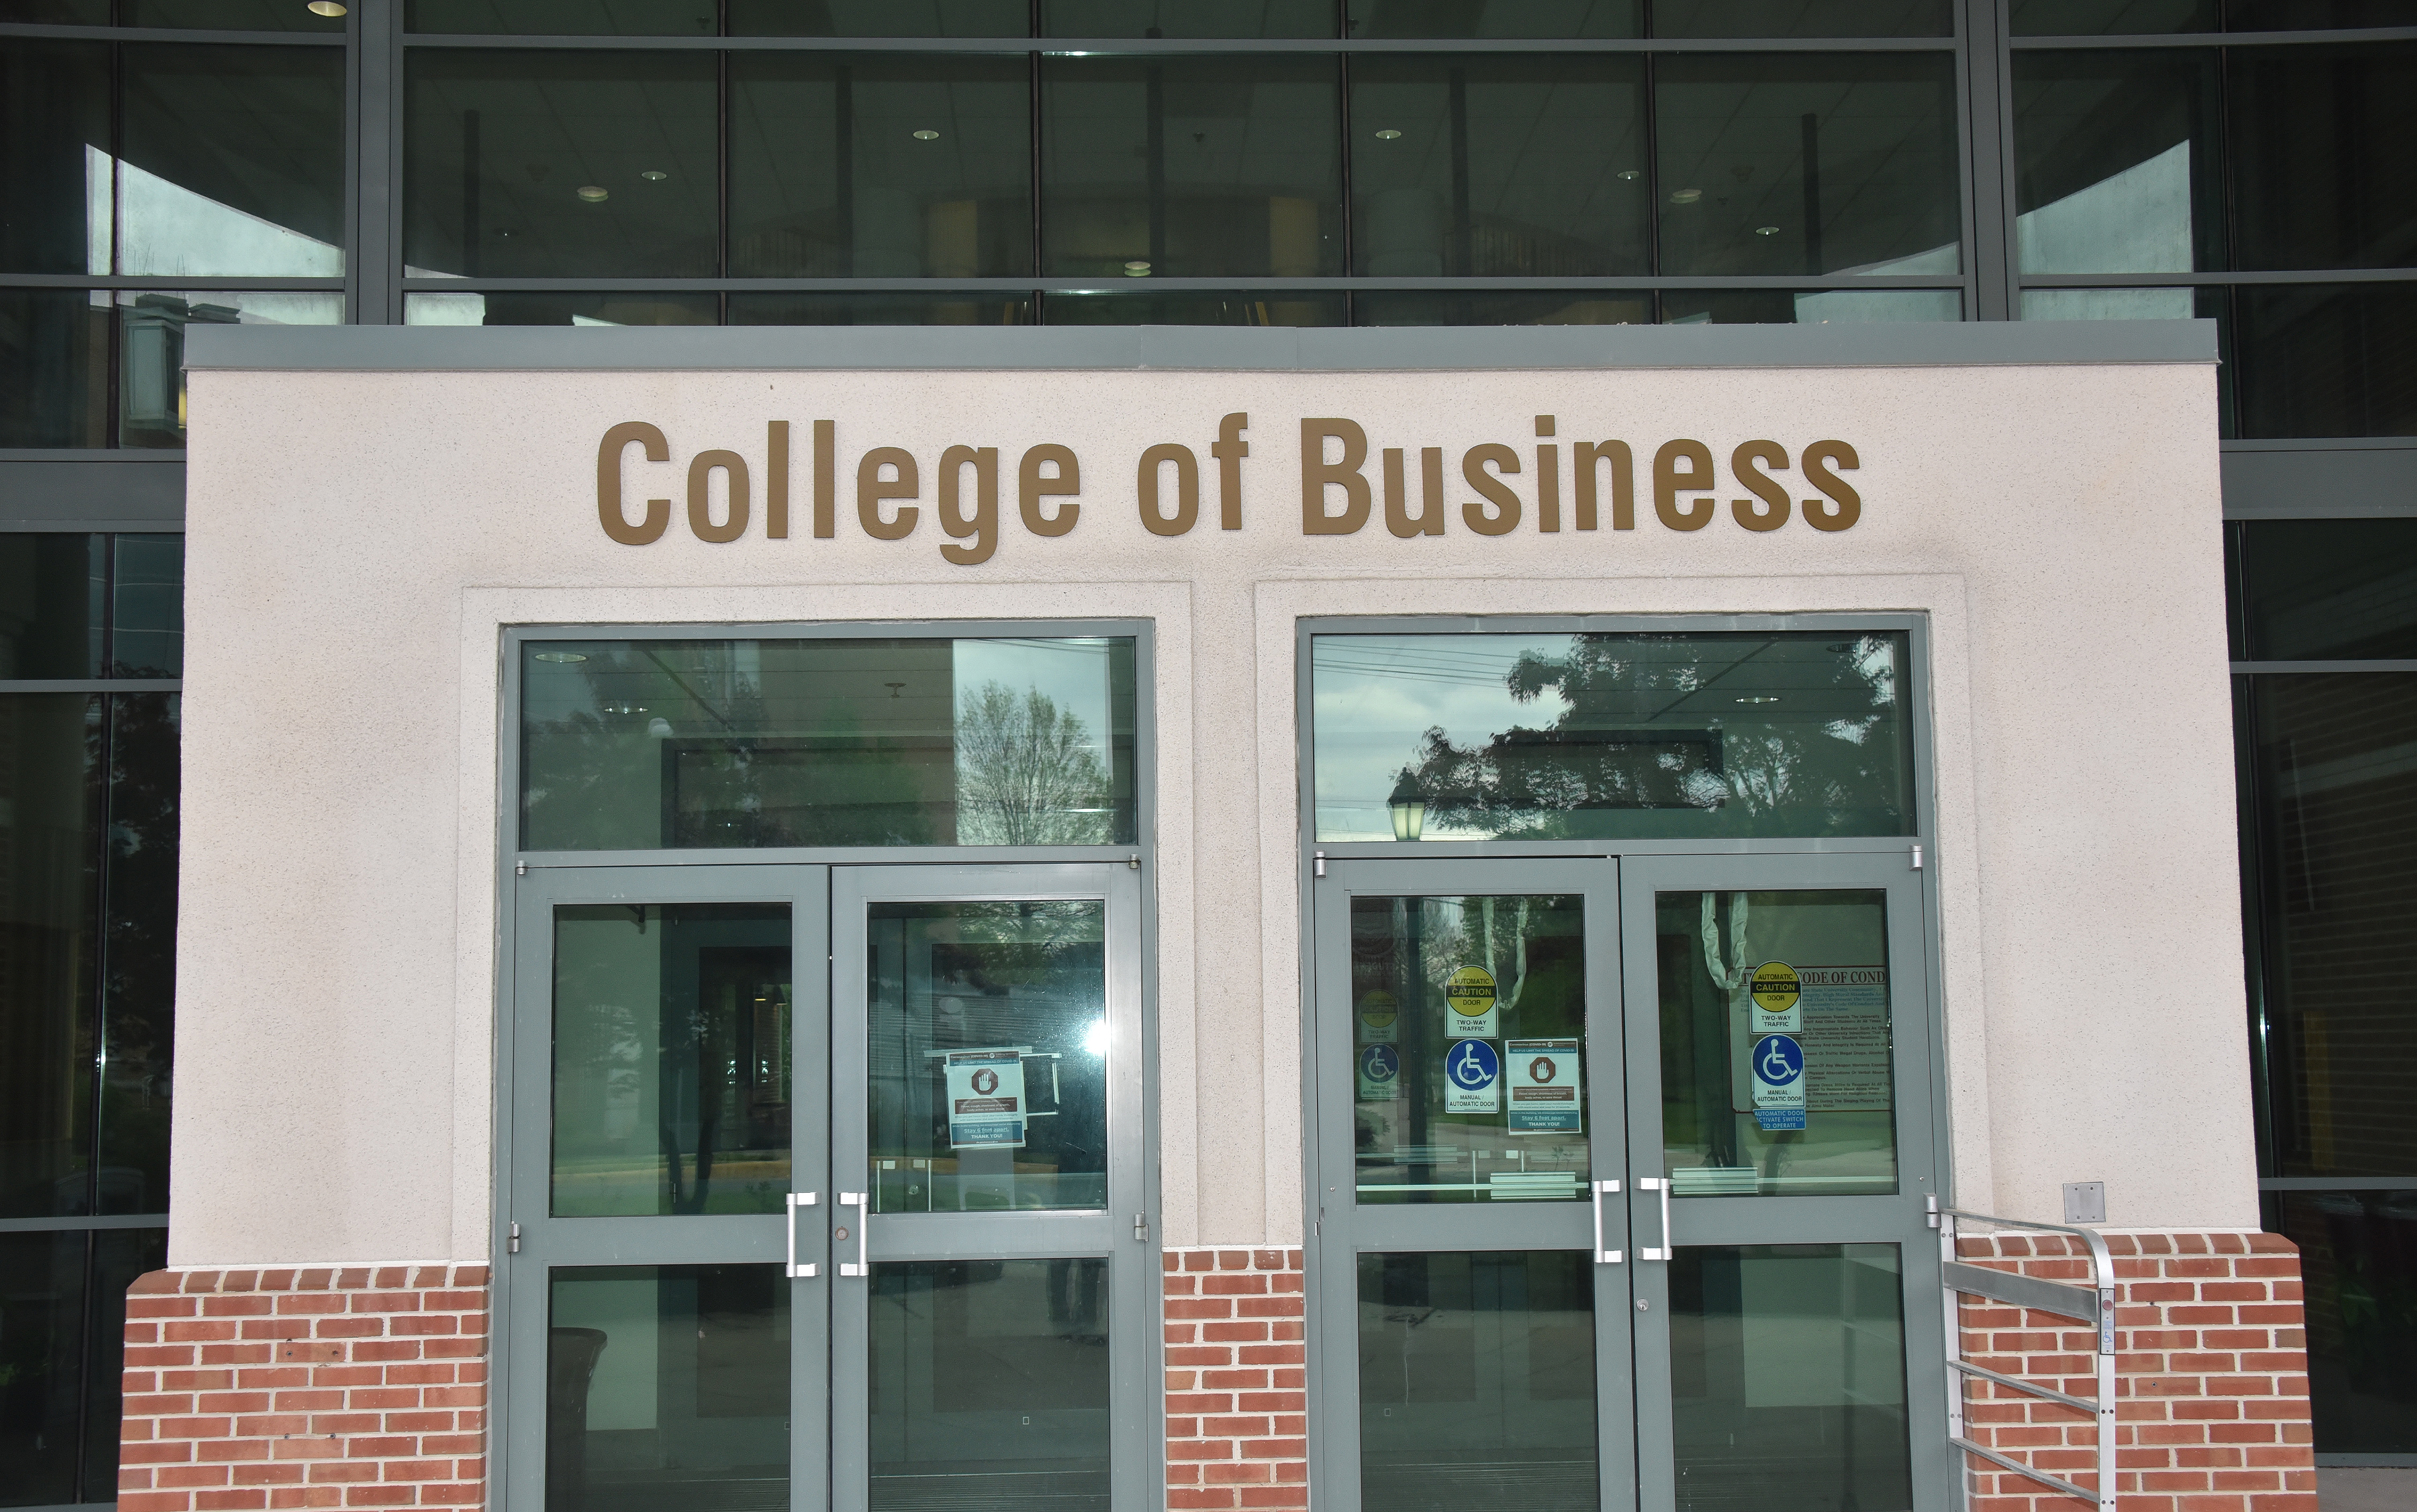 The College of Business' Human Resource Management Program recently received certification by the Society of Human Resource Management, affirming that the Management concentration meets the international standard for the discipline.